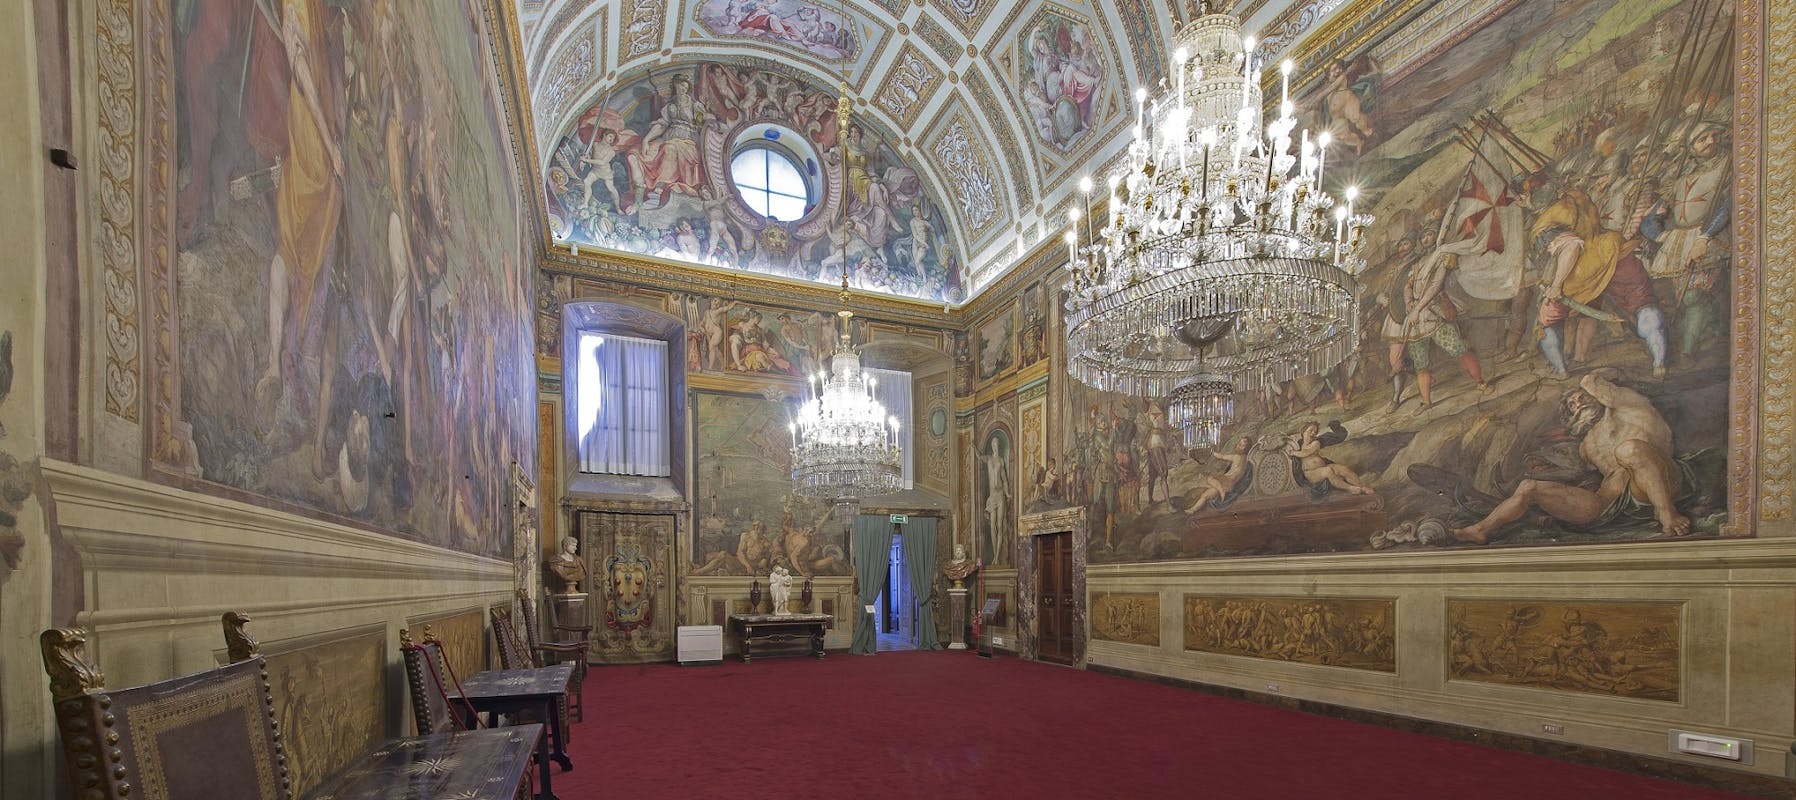 The upcoming restoration of the Room of Bona's wall paintings